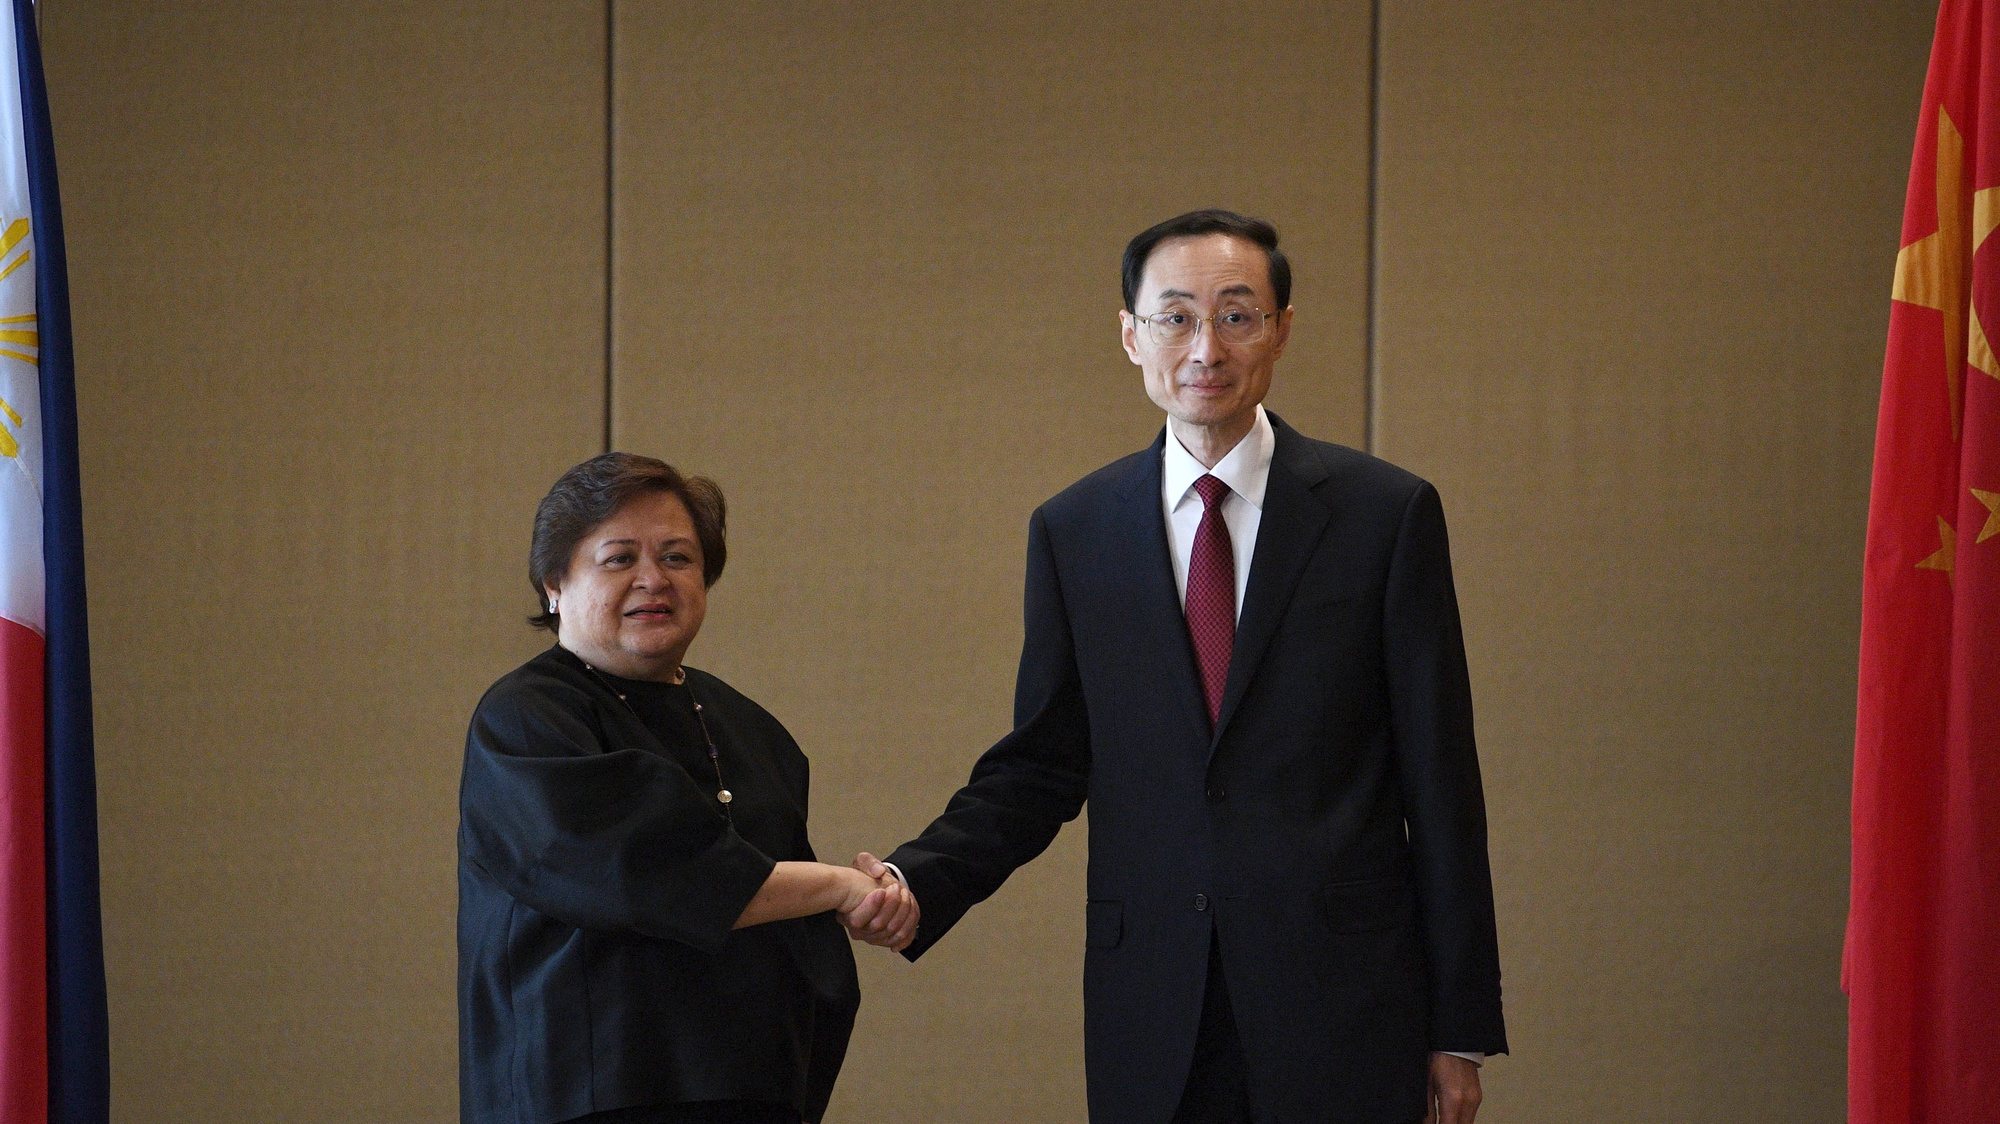 epa10537997 Filipino Foreign Affairs Undersecretary Maria Lourdes Lazaro (L) and Chinese Vice Foreign Minister Sun Weidong shake hands during a bilateral meeting in Manila, Philippines, 23 March 2023. Officials from Manila and Beijing hold the 23rd Philippines-China Foreign Ministry Consultations (FMC) and the 7th Bilateral Consultations Mechanism (BCM) on the South China sea to discuss maritime issues and to explore possible maritime cooperation.  EPA/TED ALJIBE/ POOL